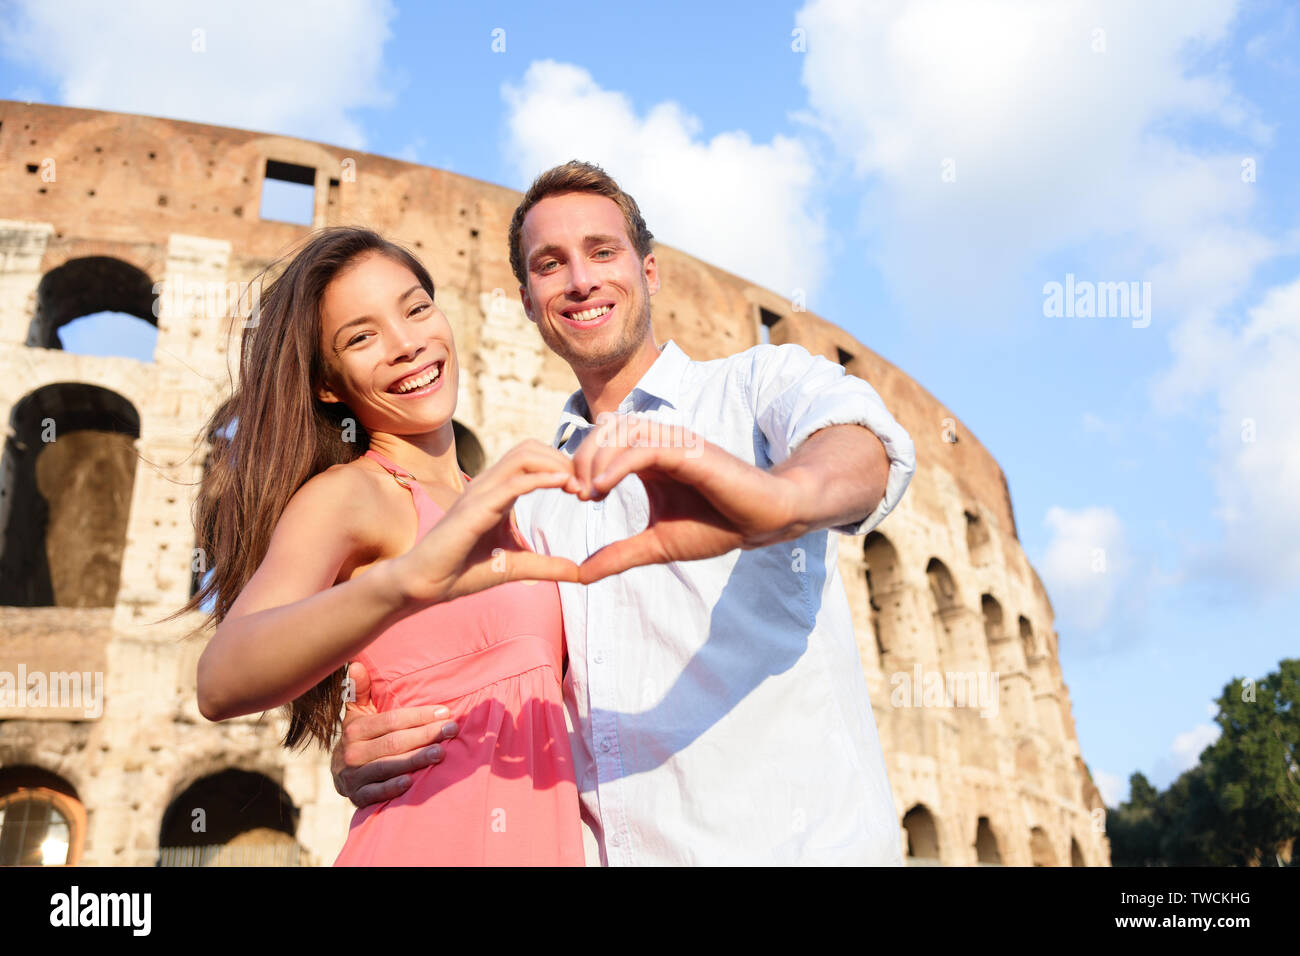 Romantic travel couple in Rome by Colosseum, Italy. Happy lovers on honeymoon showing heart sharped hands having fun in front of Coliseum. Love and travel concept with multiracial couple. Stock Photo